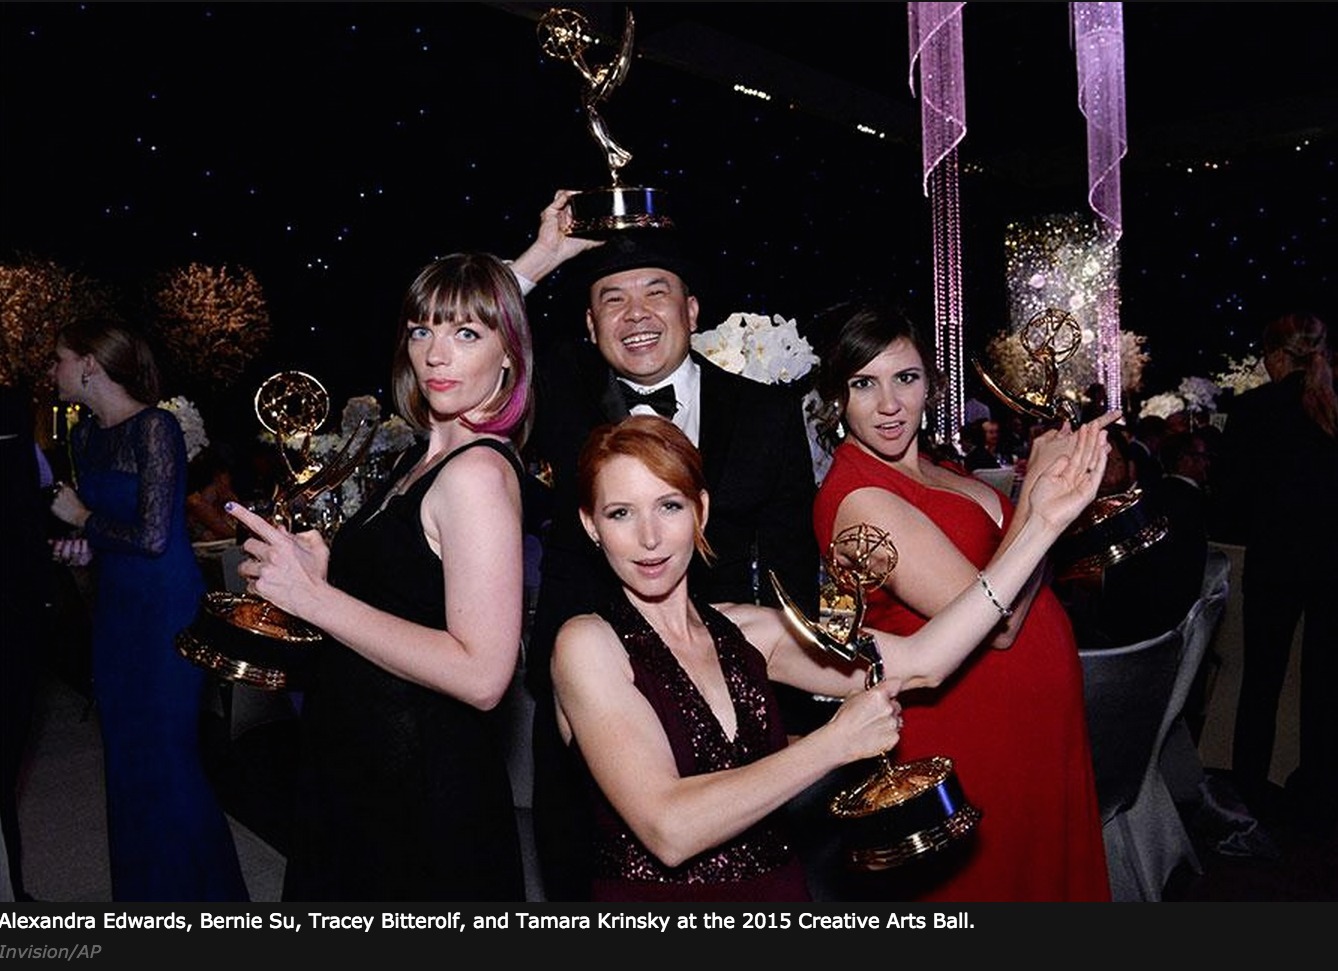 Emmy Winner Tamara Krinsky with the Emma Approved team at the 2015 Creative Arts Emmy Awards Governors Ball.